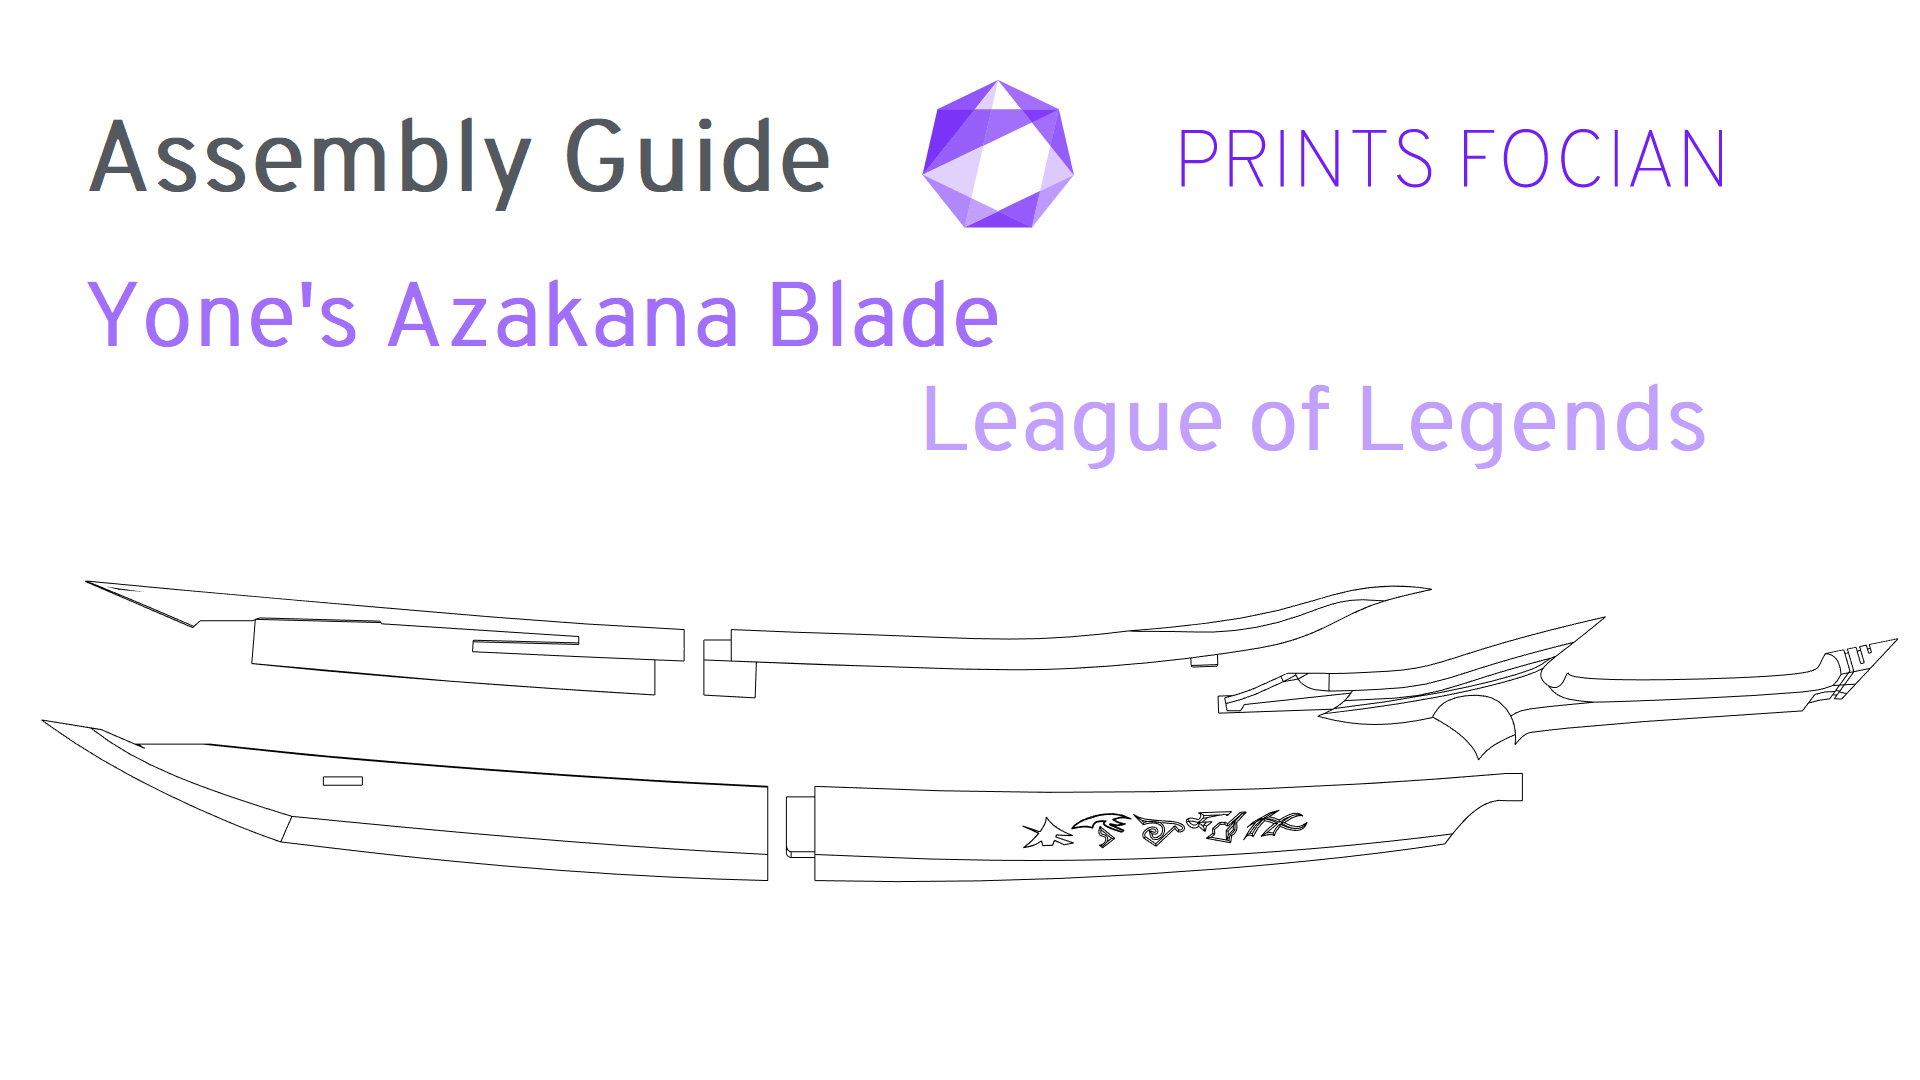 Wireframe exploded image of Yones Azakana Sword on a white background. Prints Focian Icon top and central. Text: Purple Prints Focian, Yones Azakana Blade and League of Legends. Dark grey text reads Assembly Guide